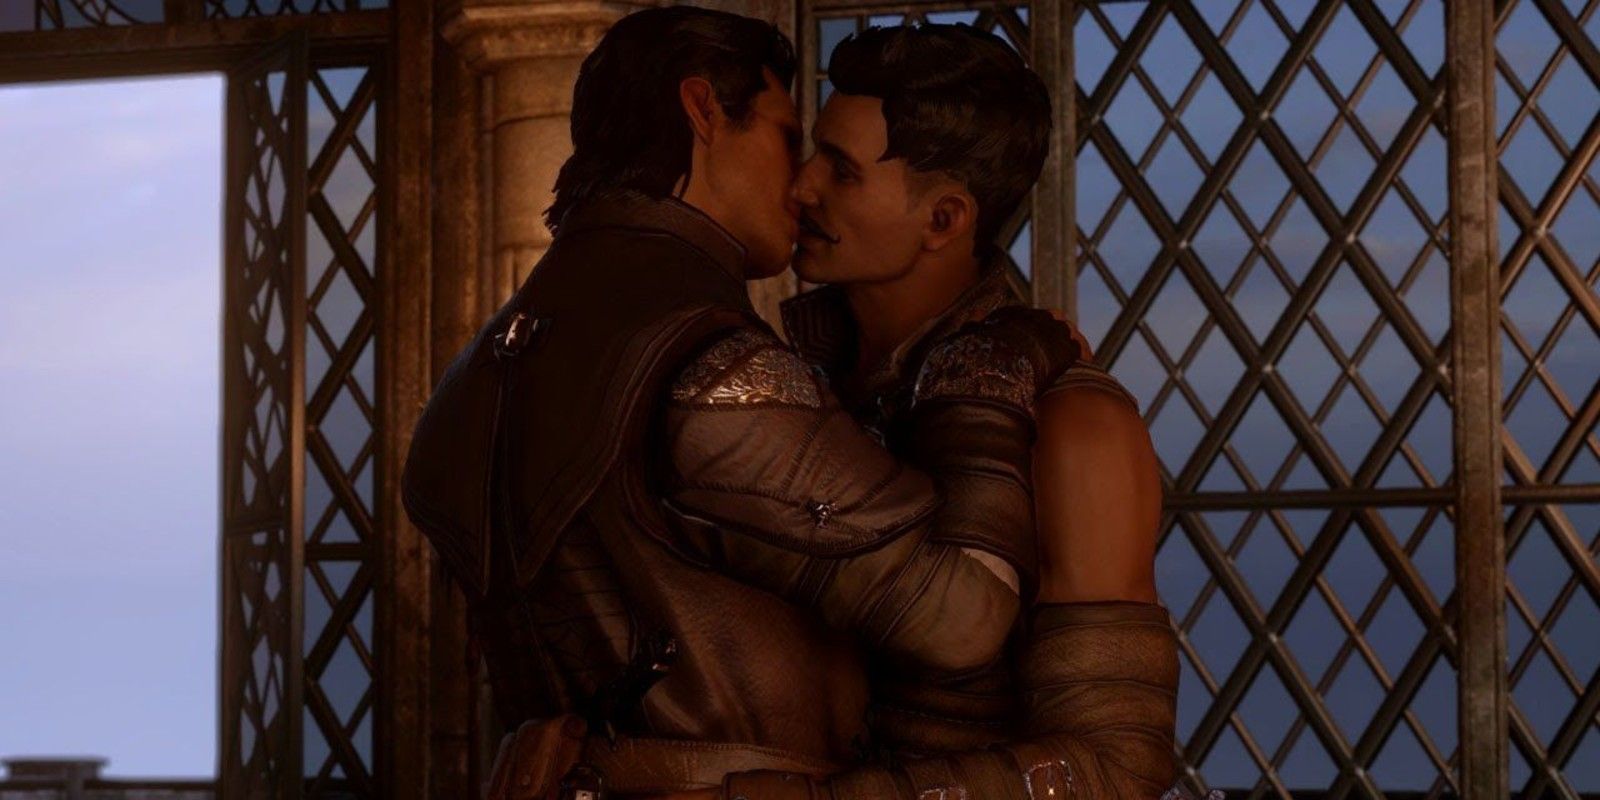 Dorian and the Inquisitor about to kiss in Dragon Age: Inquisition.